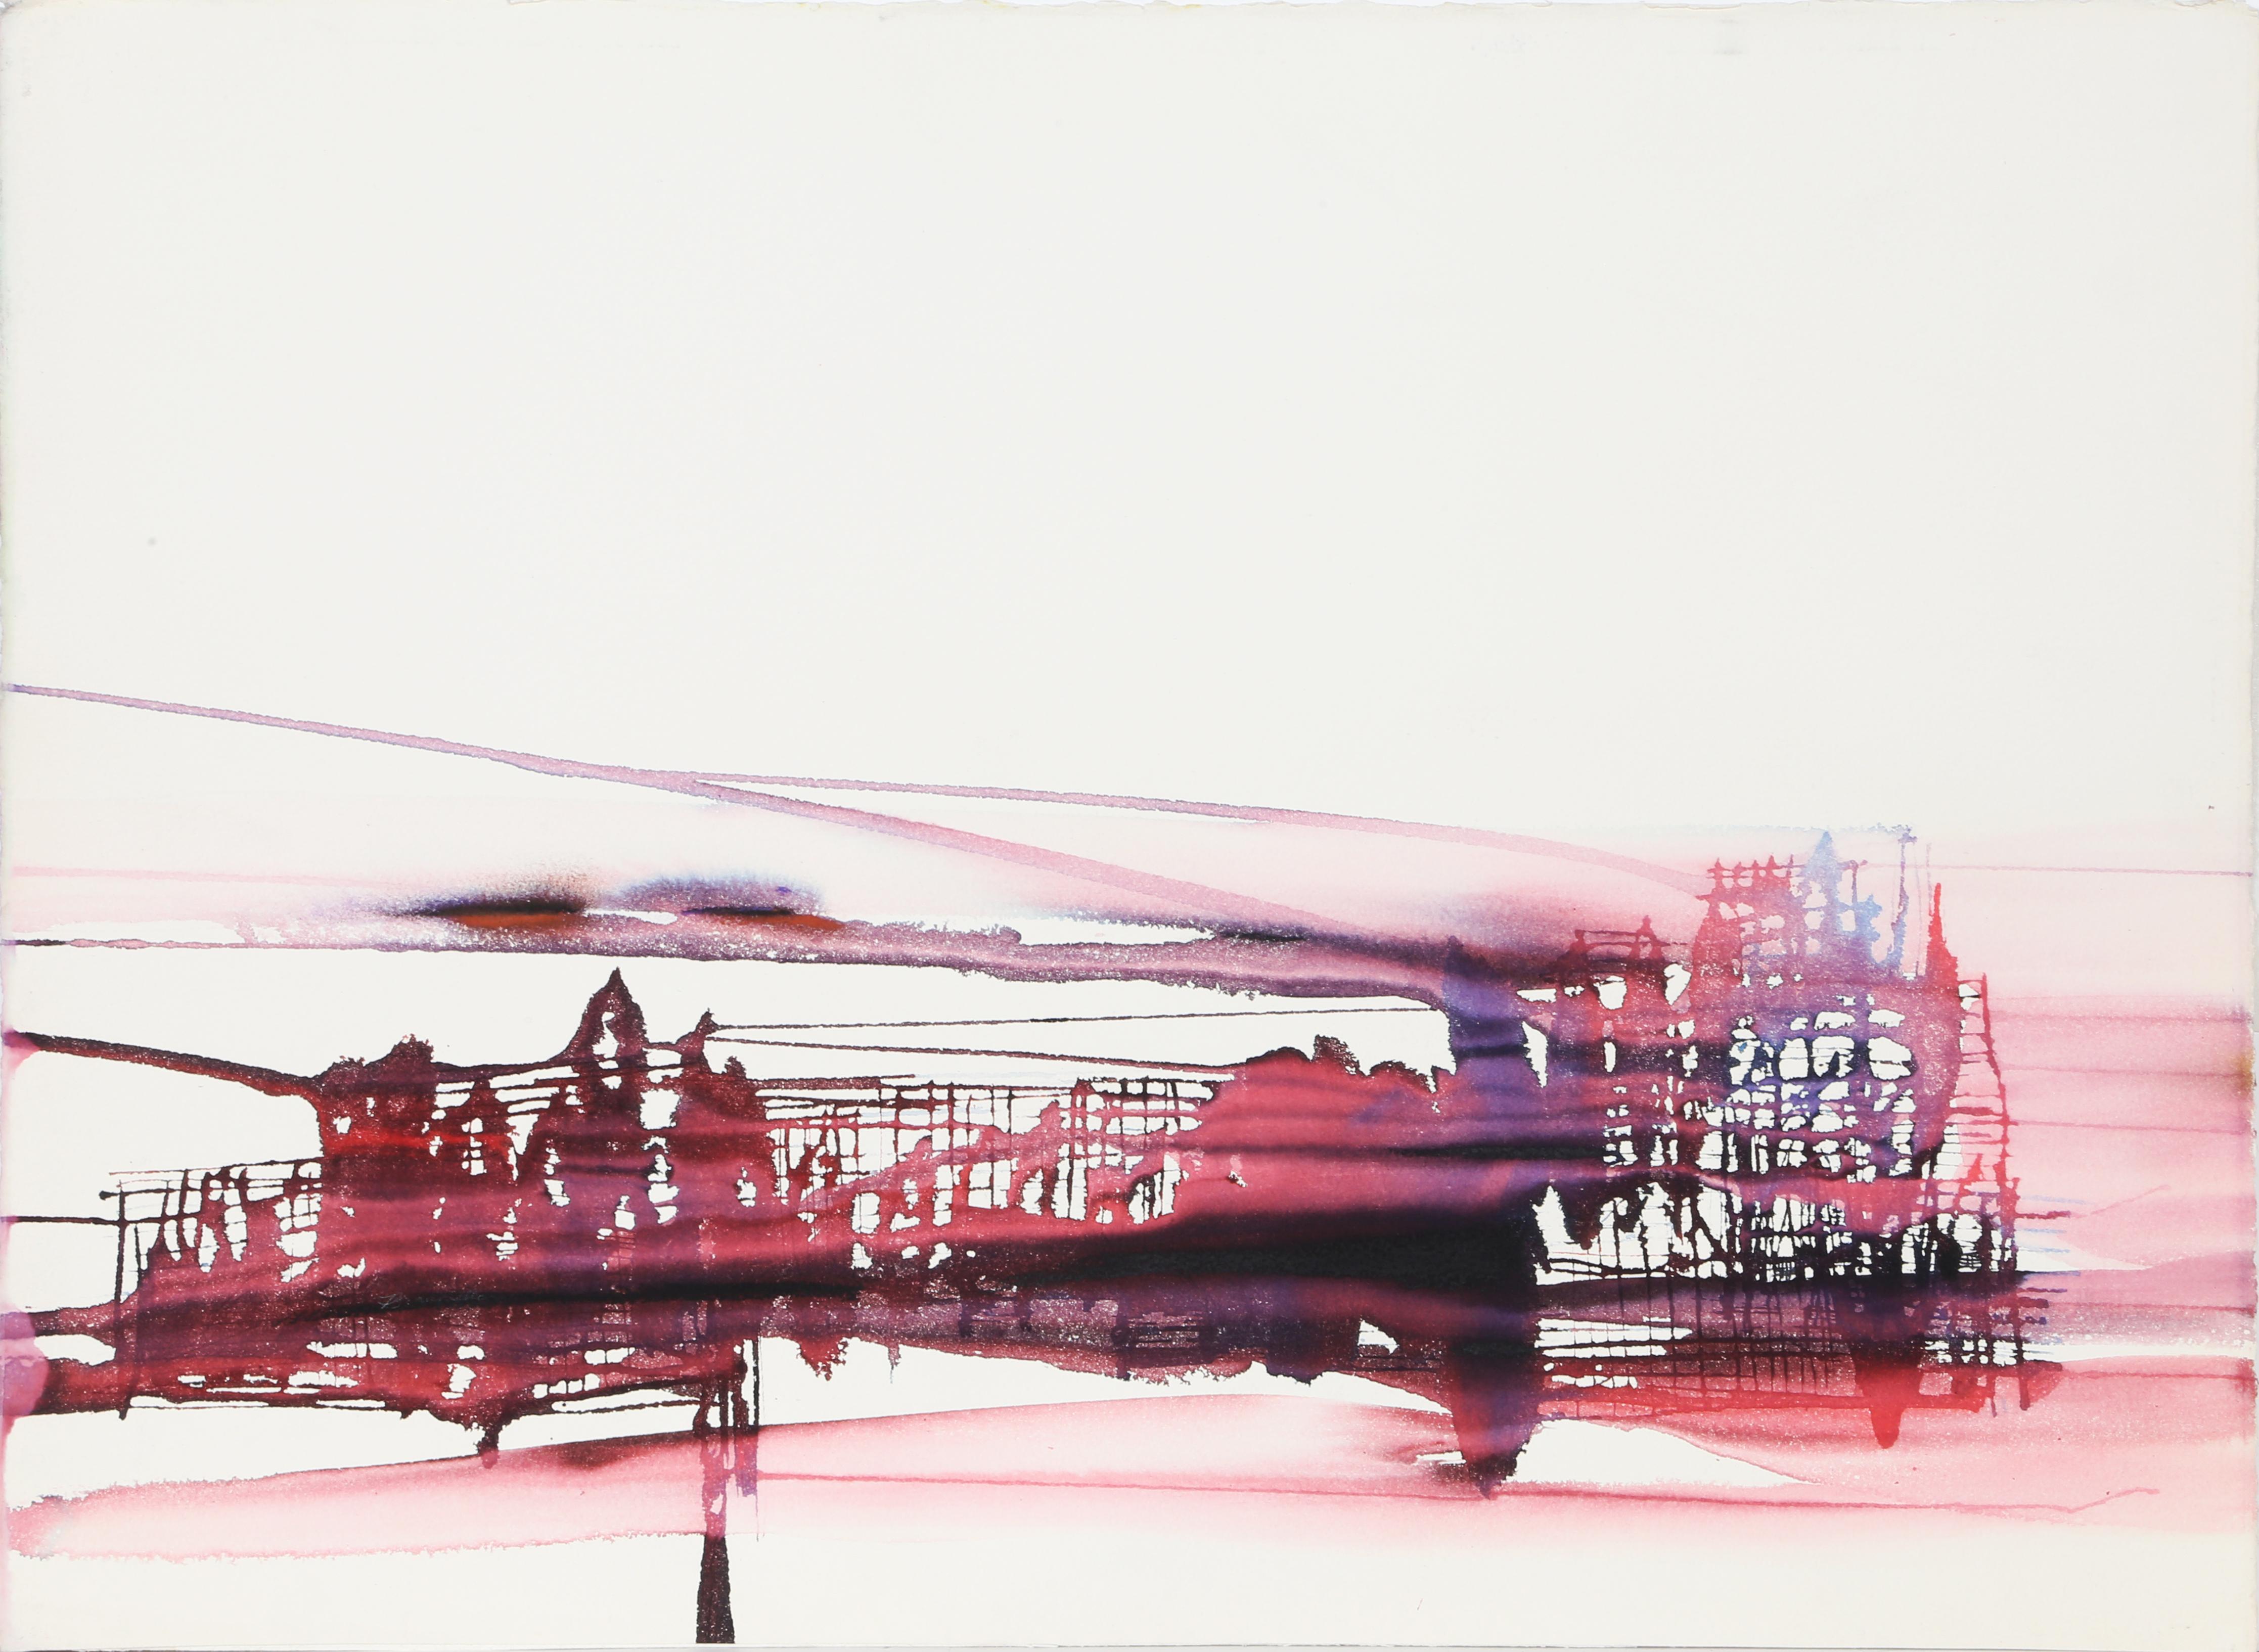 A city rendered almost entirely in red, with the water streaked across its surface separating out values of blue and purple. This unique watercolor is signed by the artist.

Cityscape
Geri Taper, American (1929–2004)
Watercolor on Arches, signed in